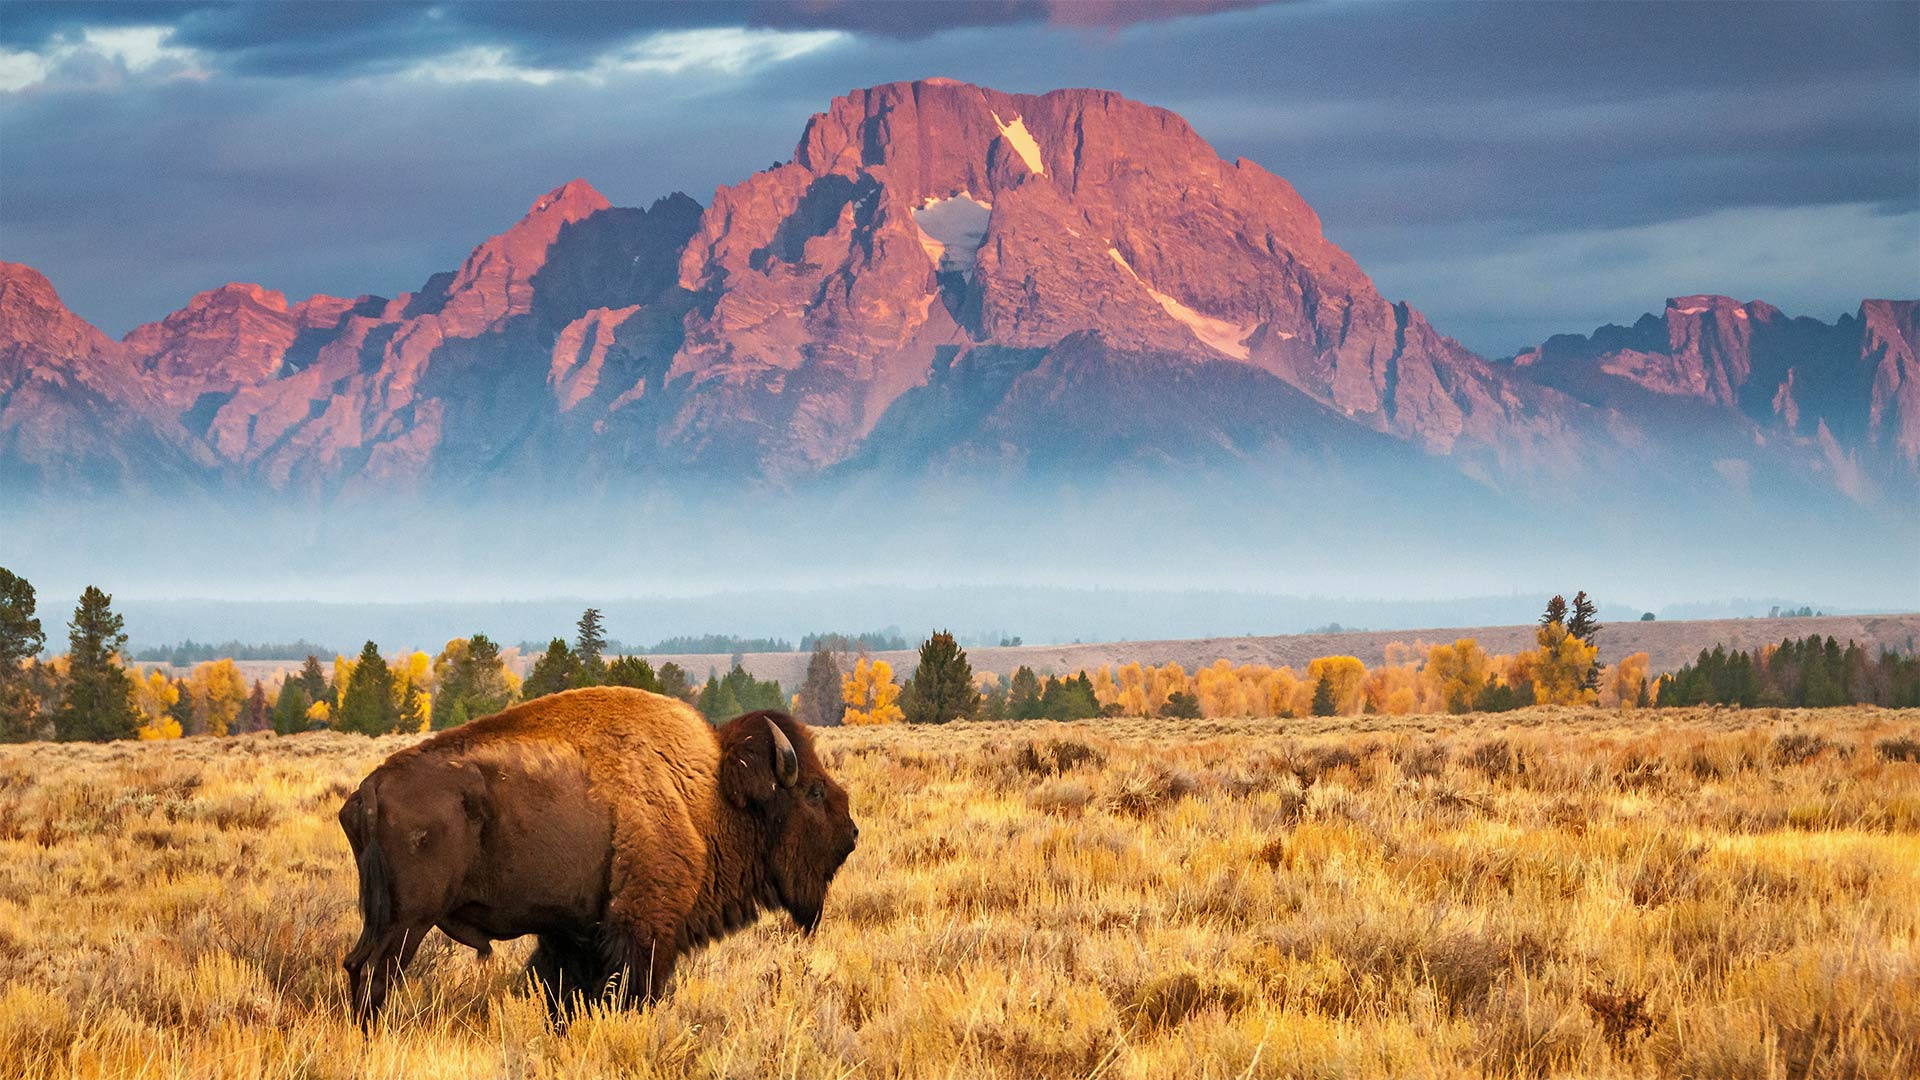 Bison in Grand Teton National Park, Wyoming - Brian Evans/Getty Images)